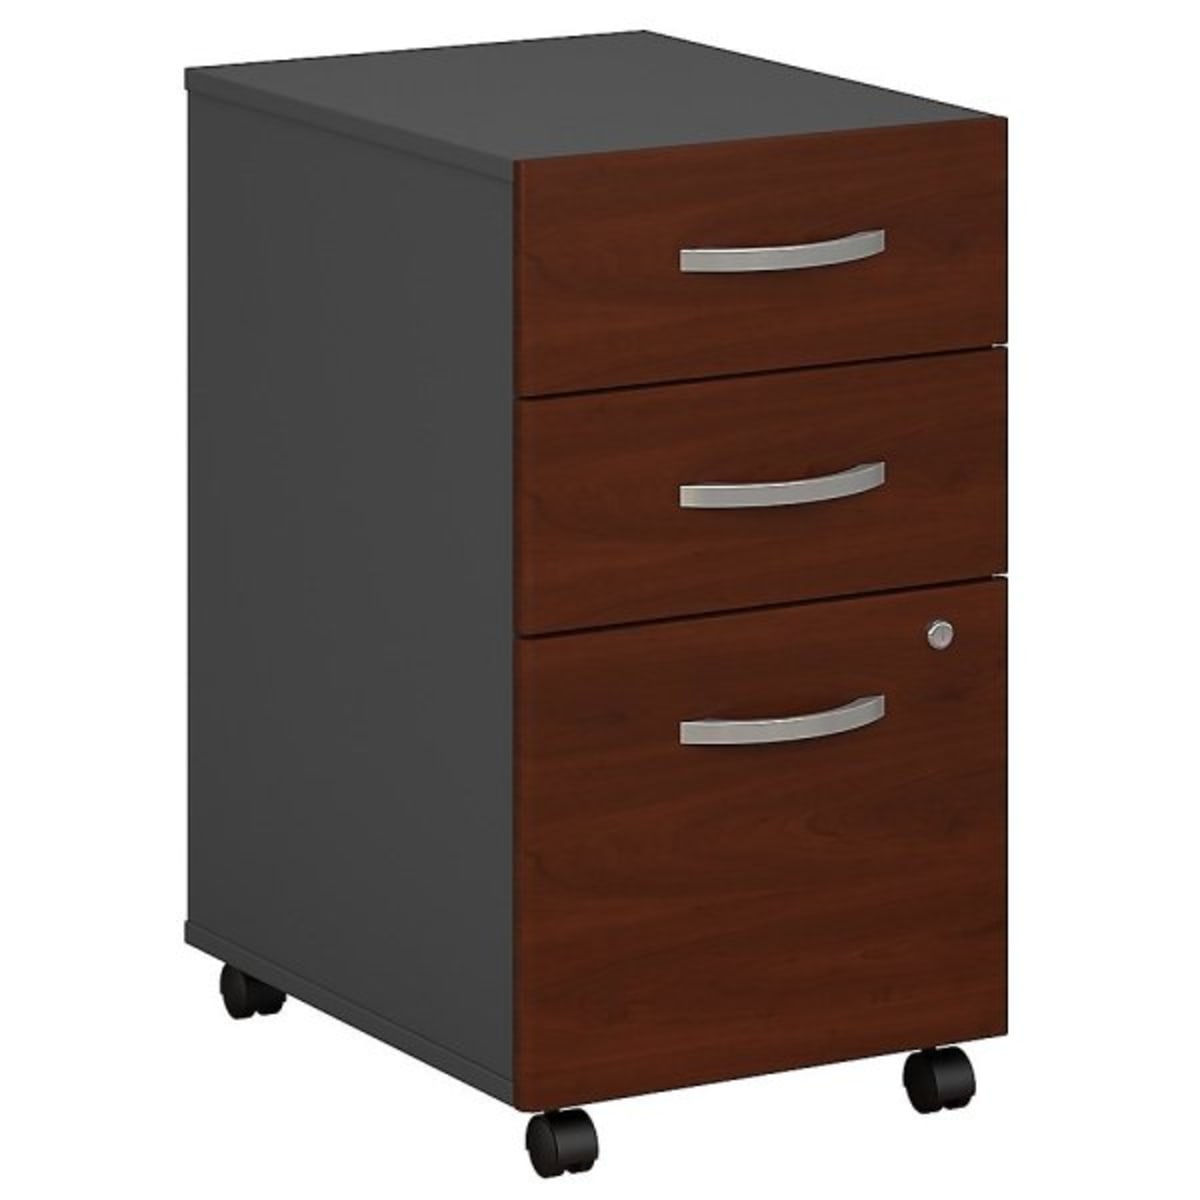 Realspace Cherry Landon Desk With Hutch Wd Of 5041 55 1 2 X 23